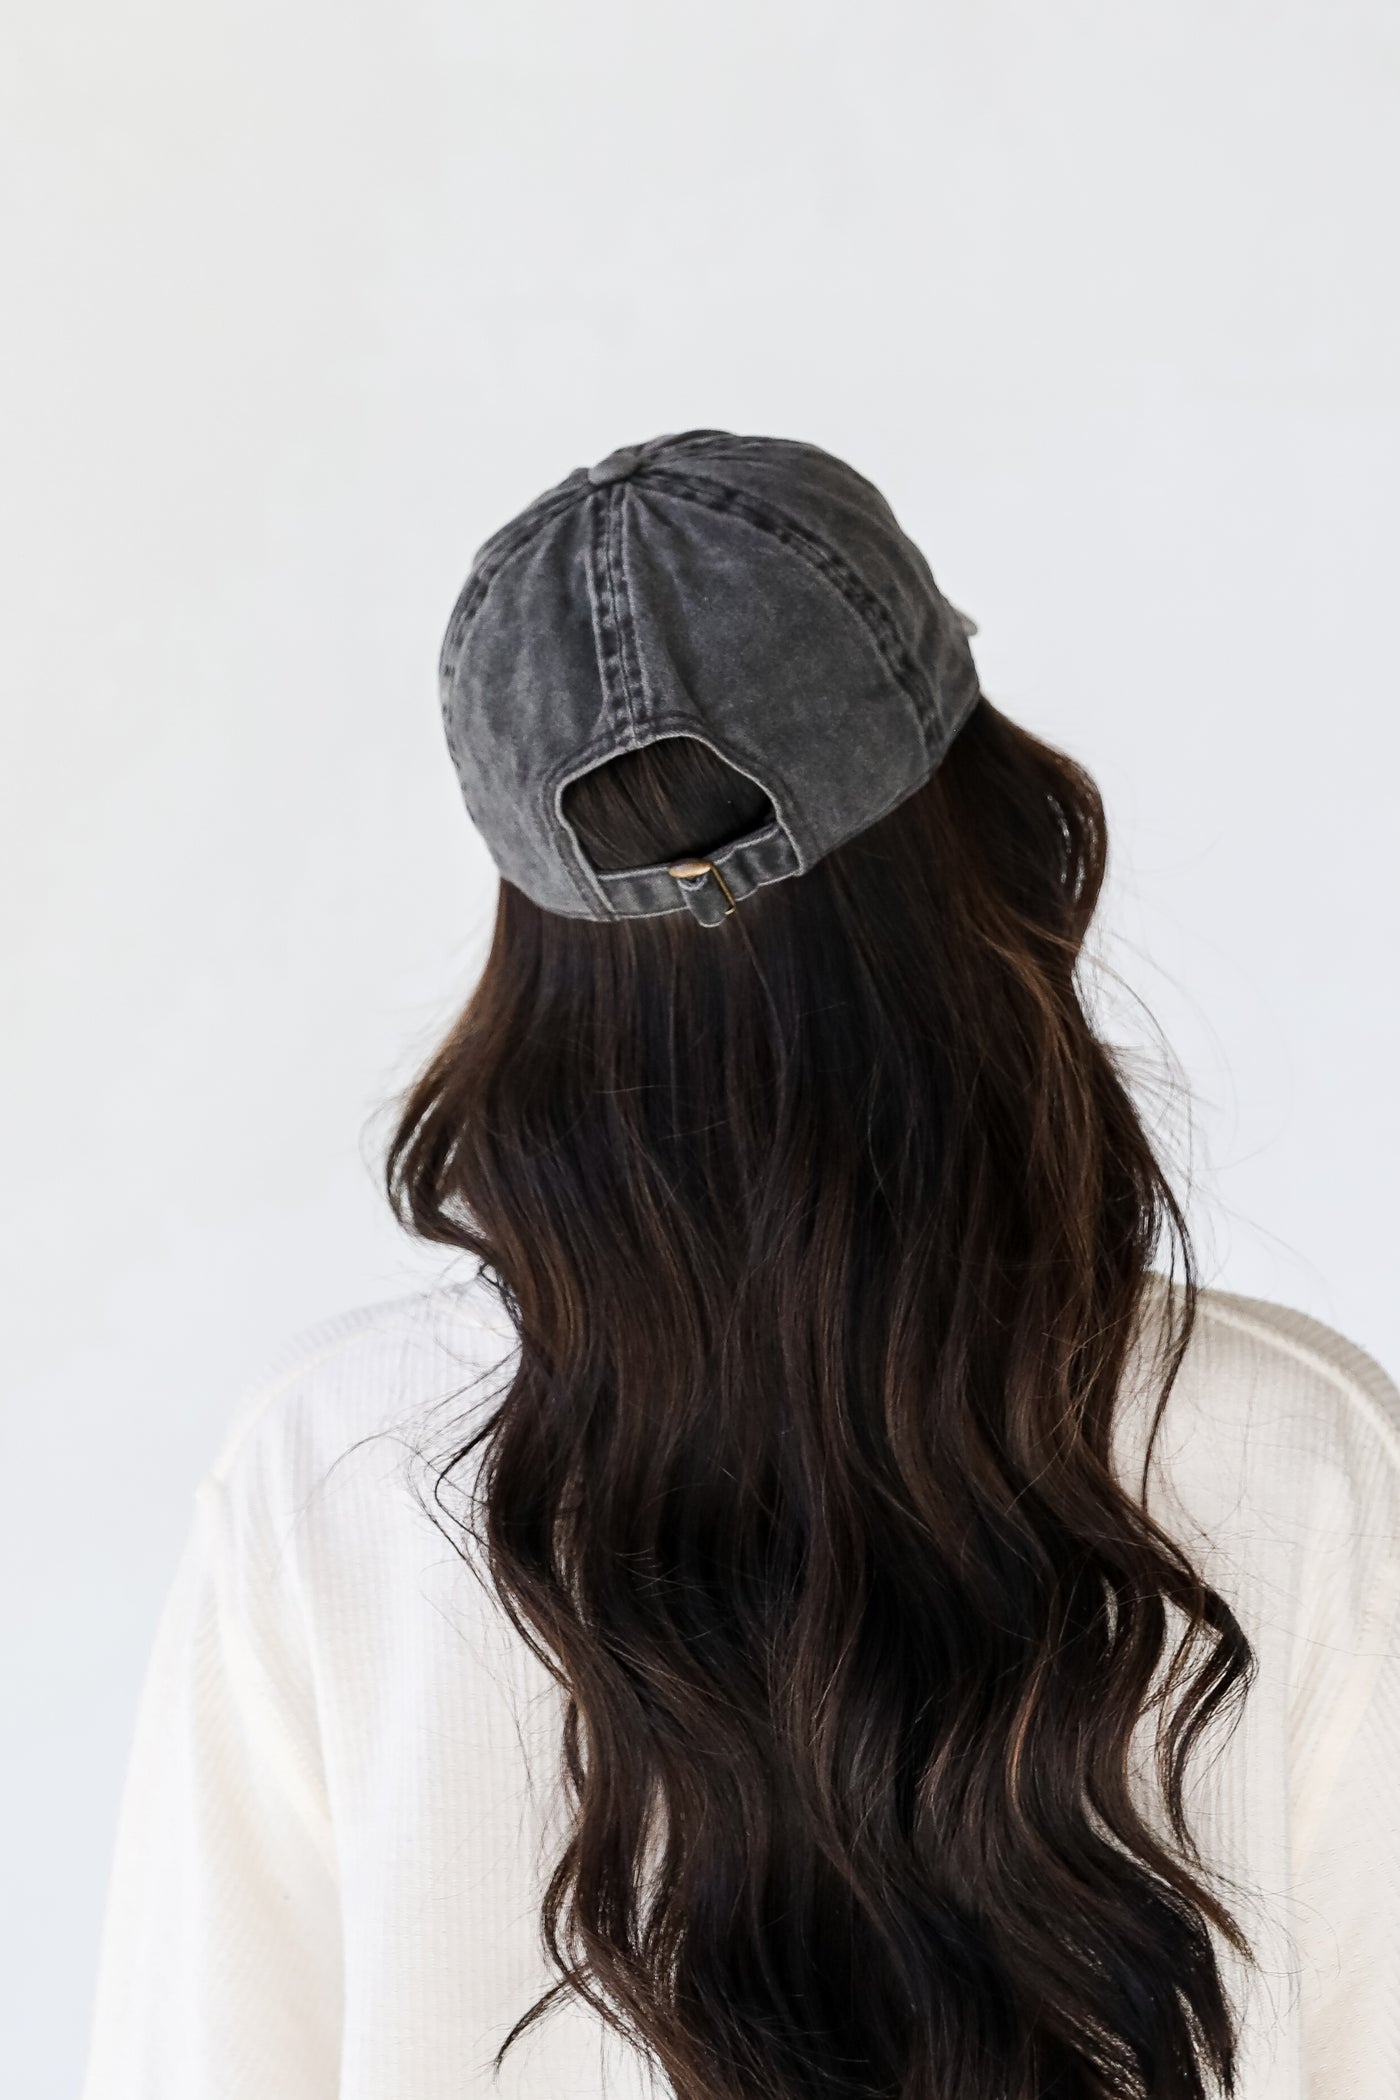 Greenville Embroidered Hat in black back view